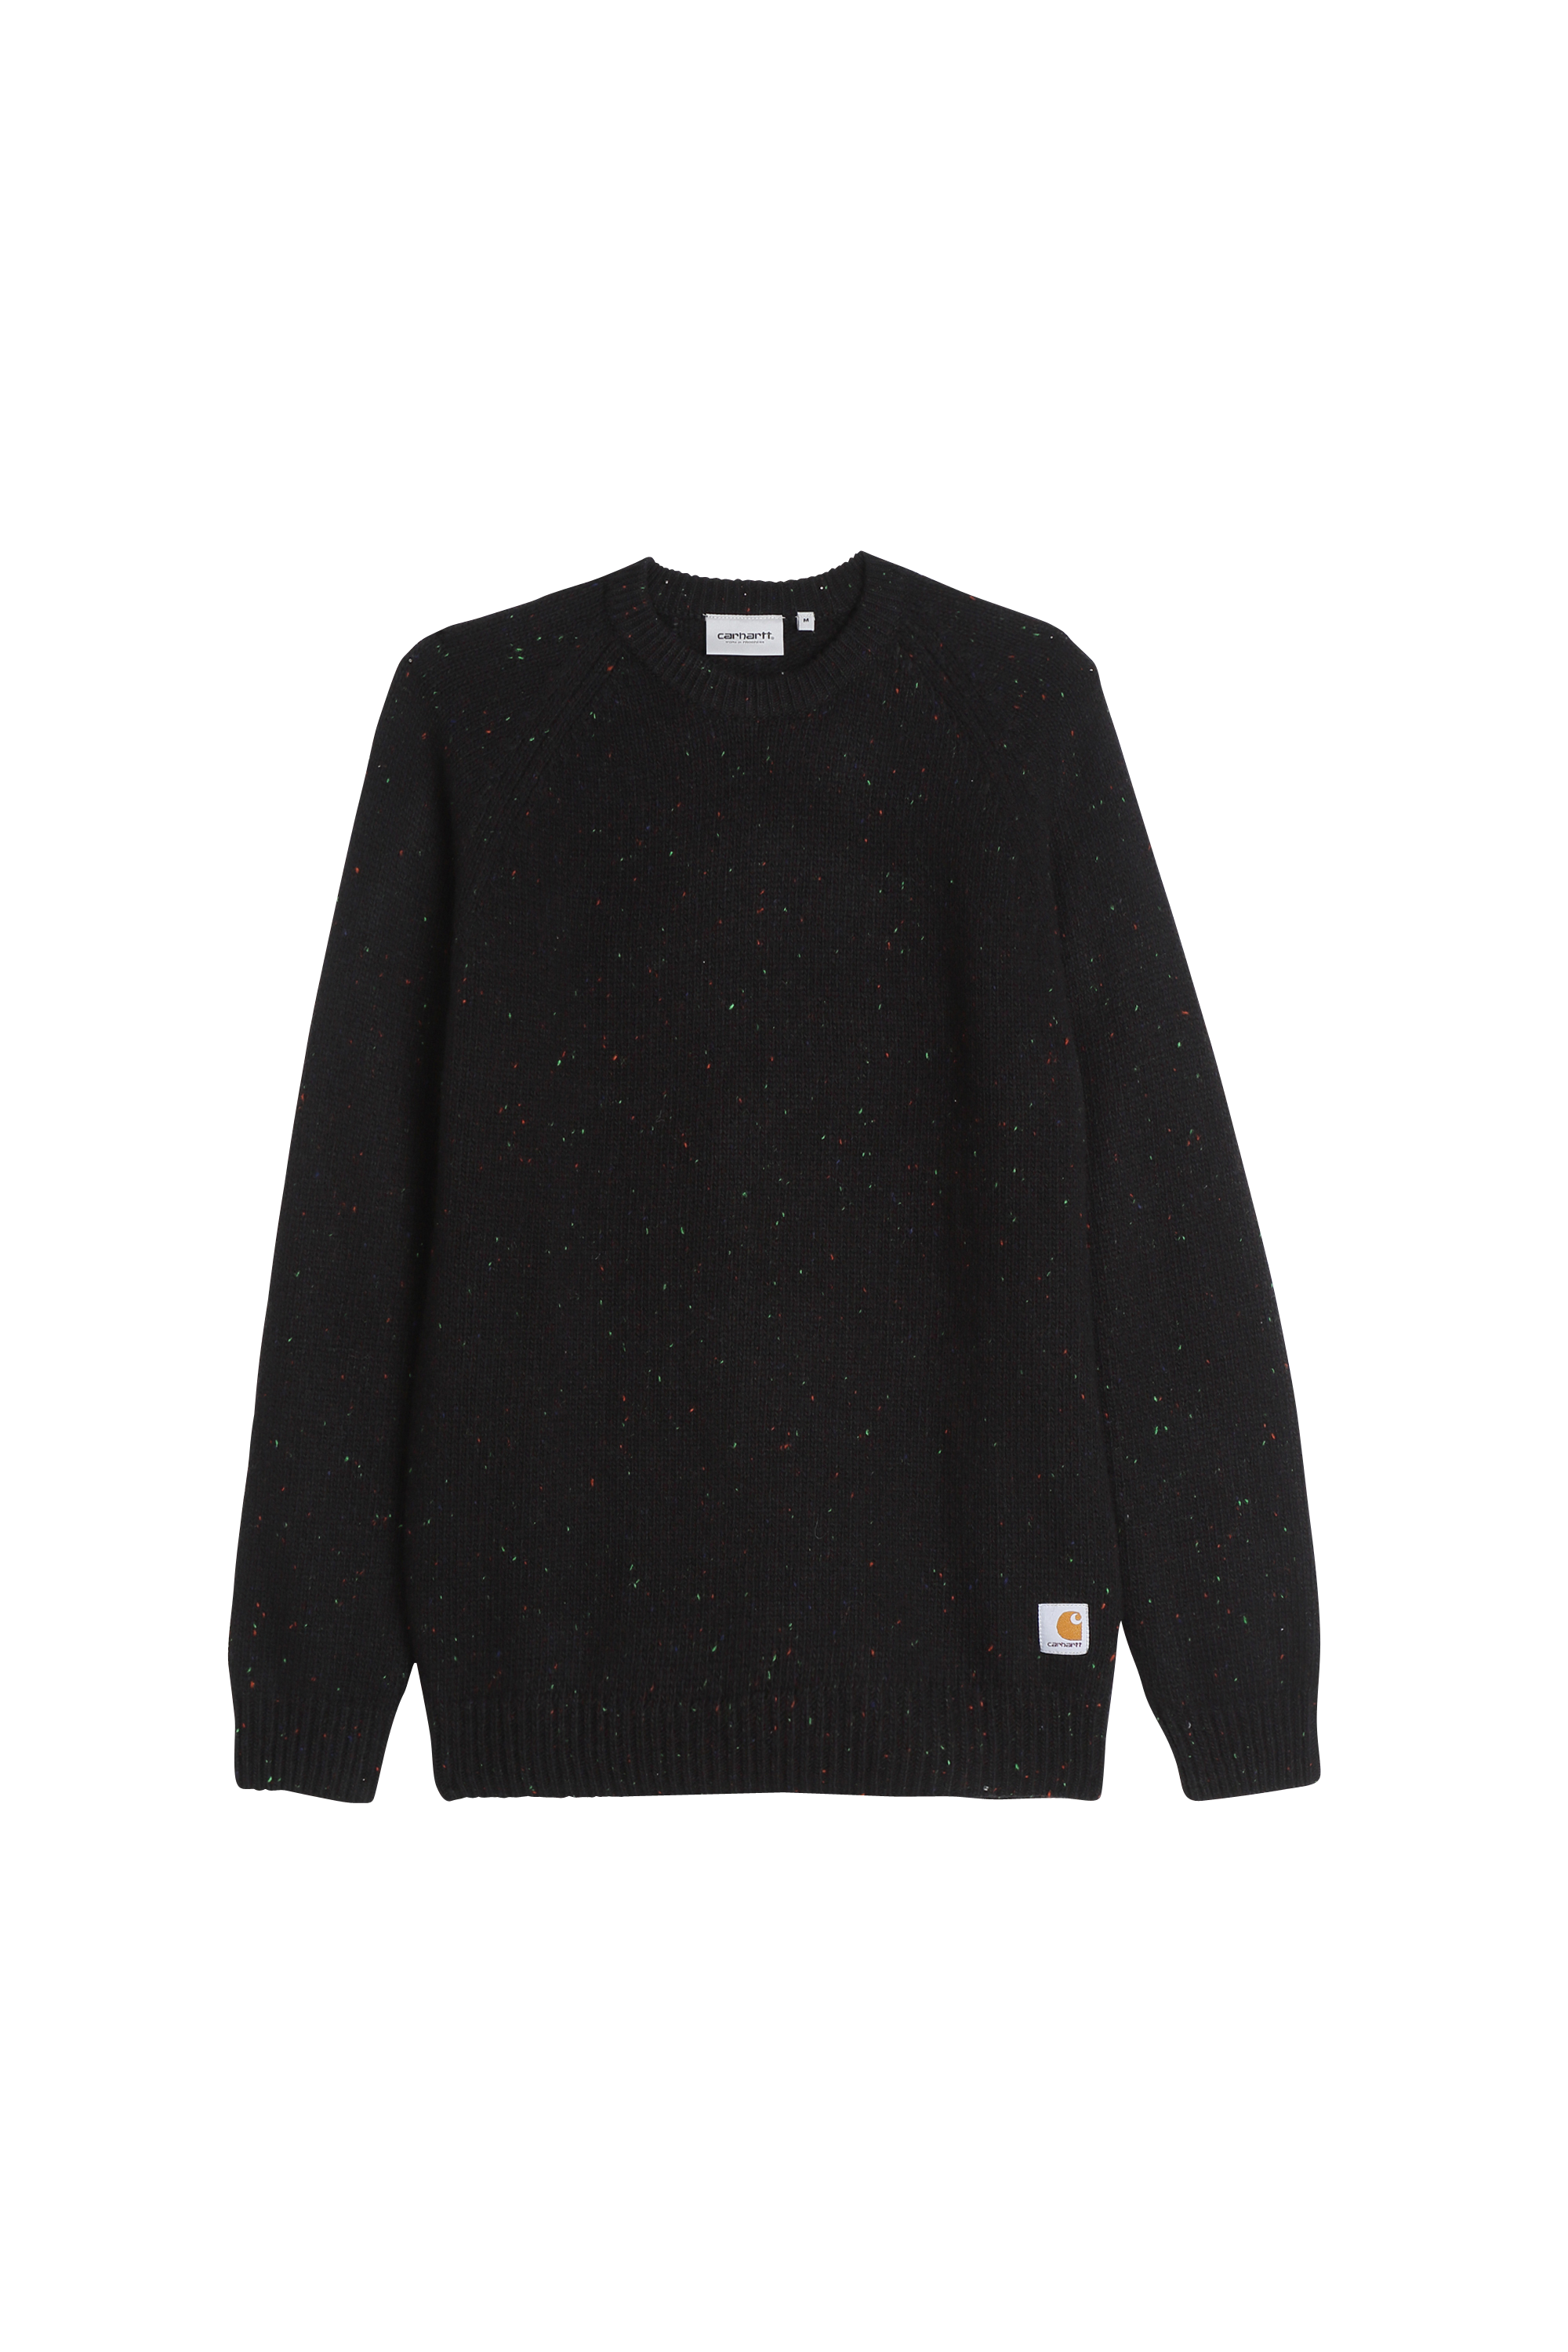 Carhartt Wip - Pull - Taille M